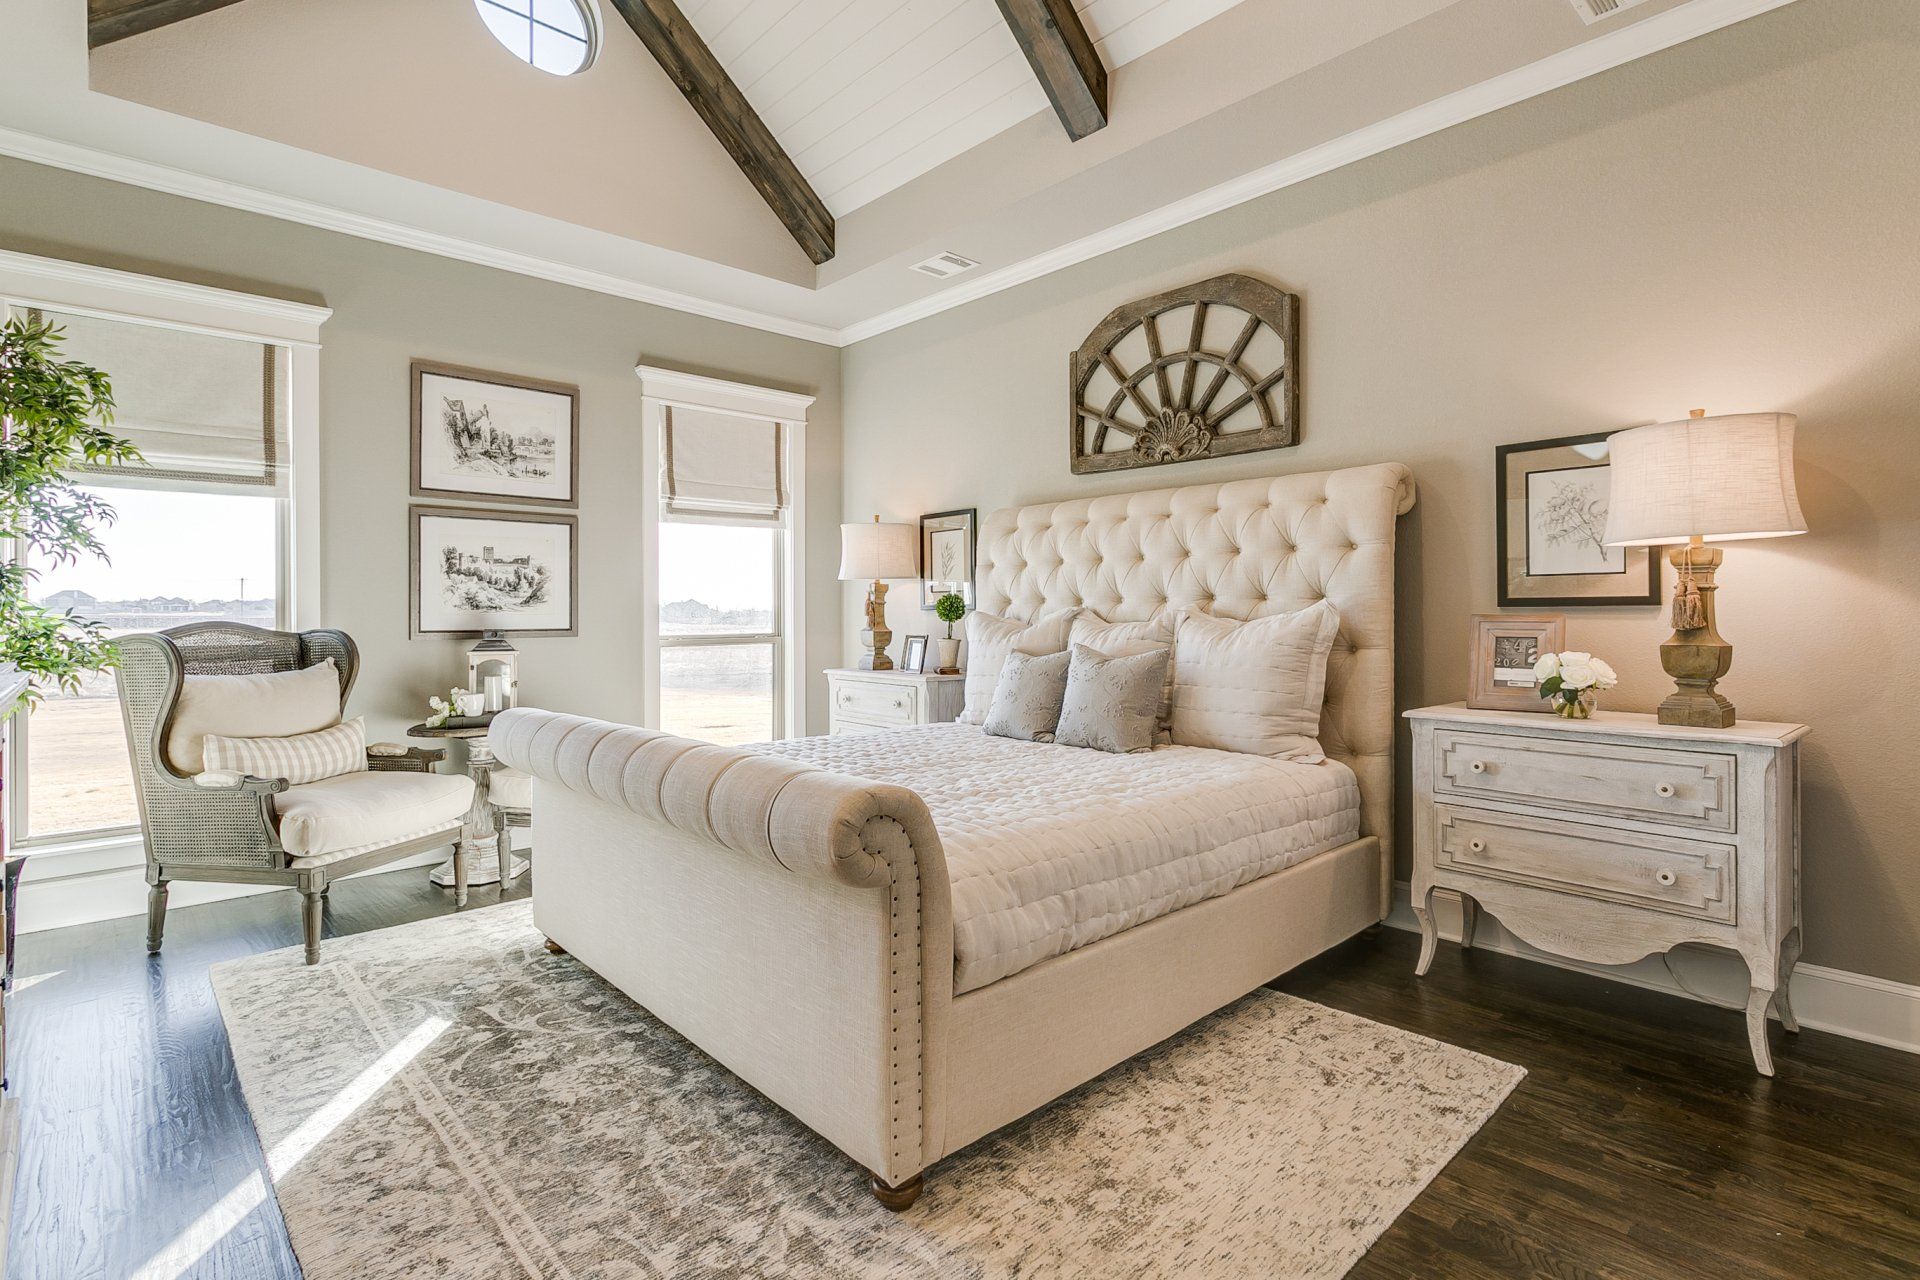 Elegant bedroom | 3D Floor Plan Tour | Our Gallery | John Houston Homes | New Homes for Sale in Dallas-Fort Worth, Waco and surrounding areas.